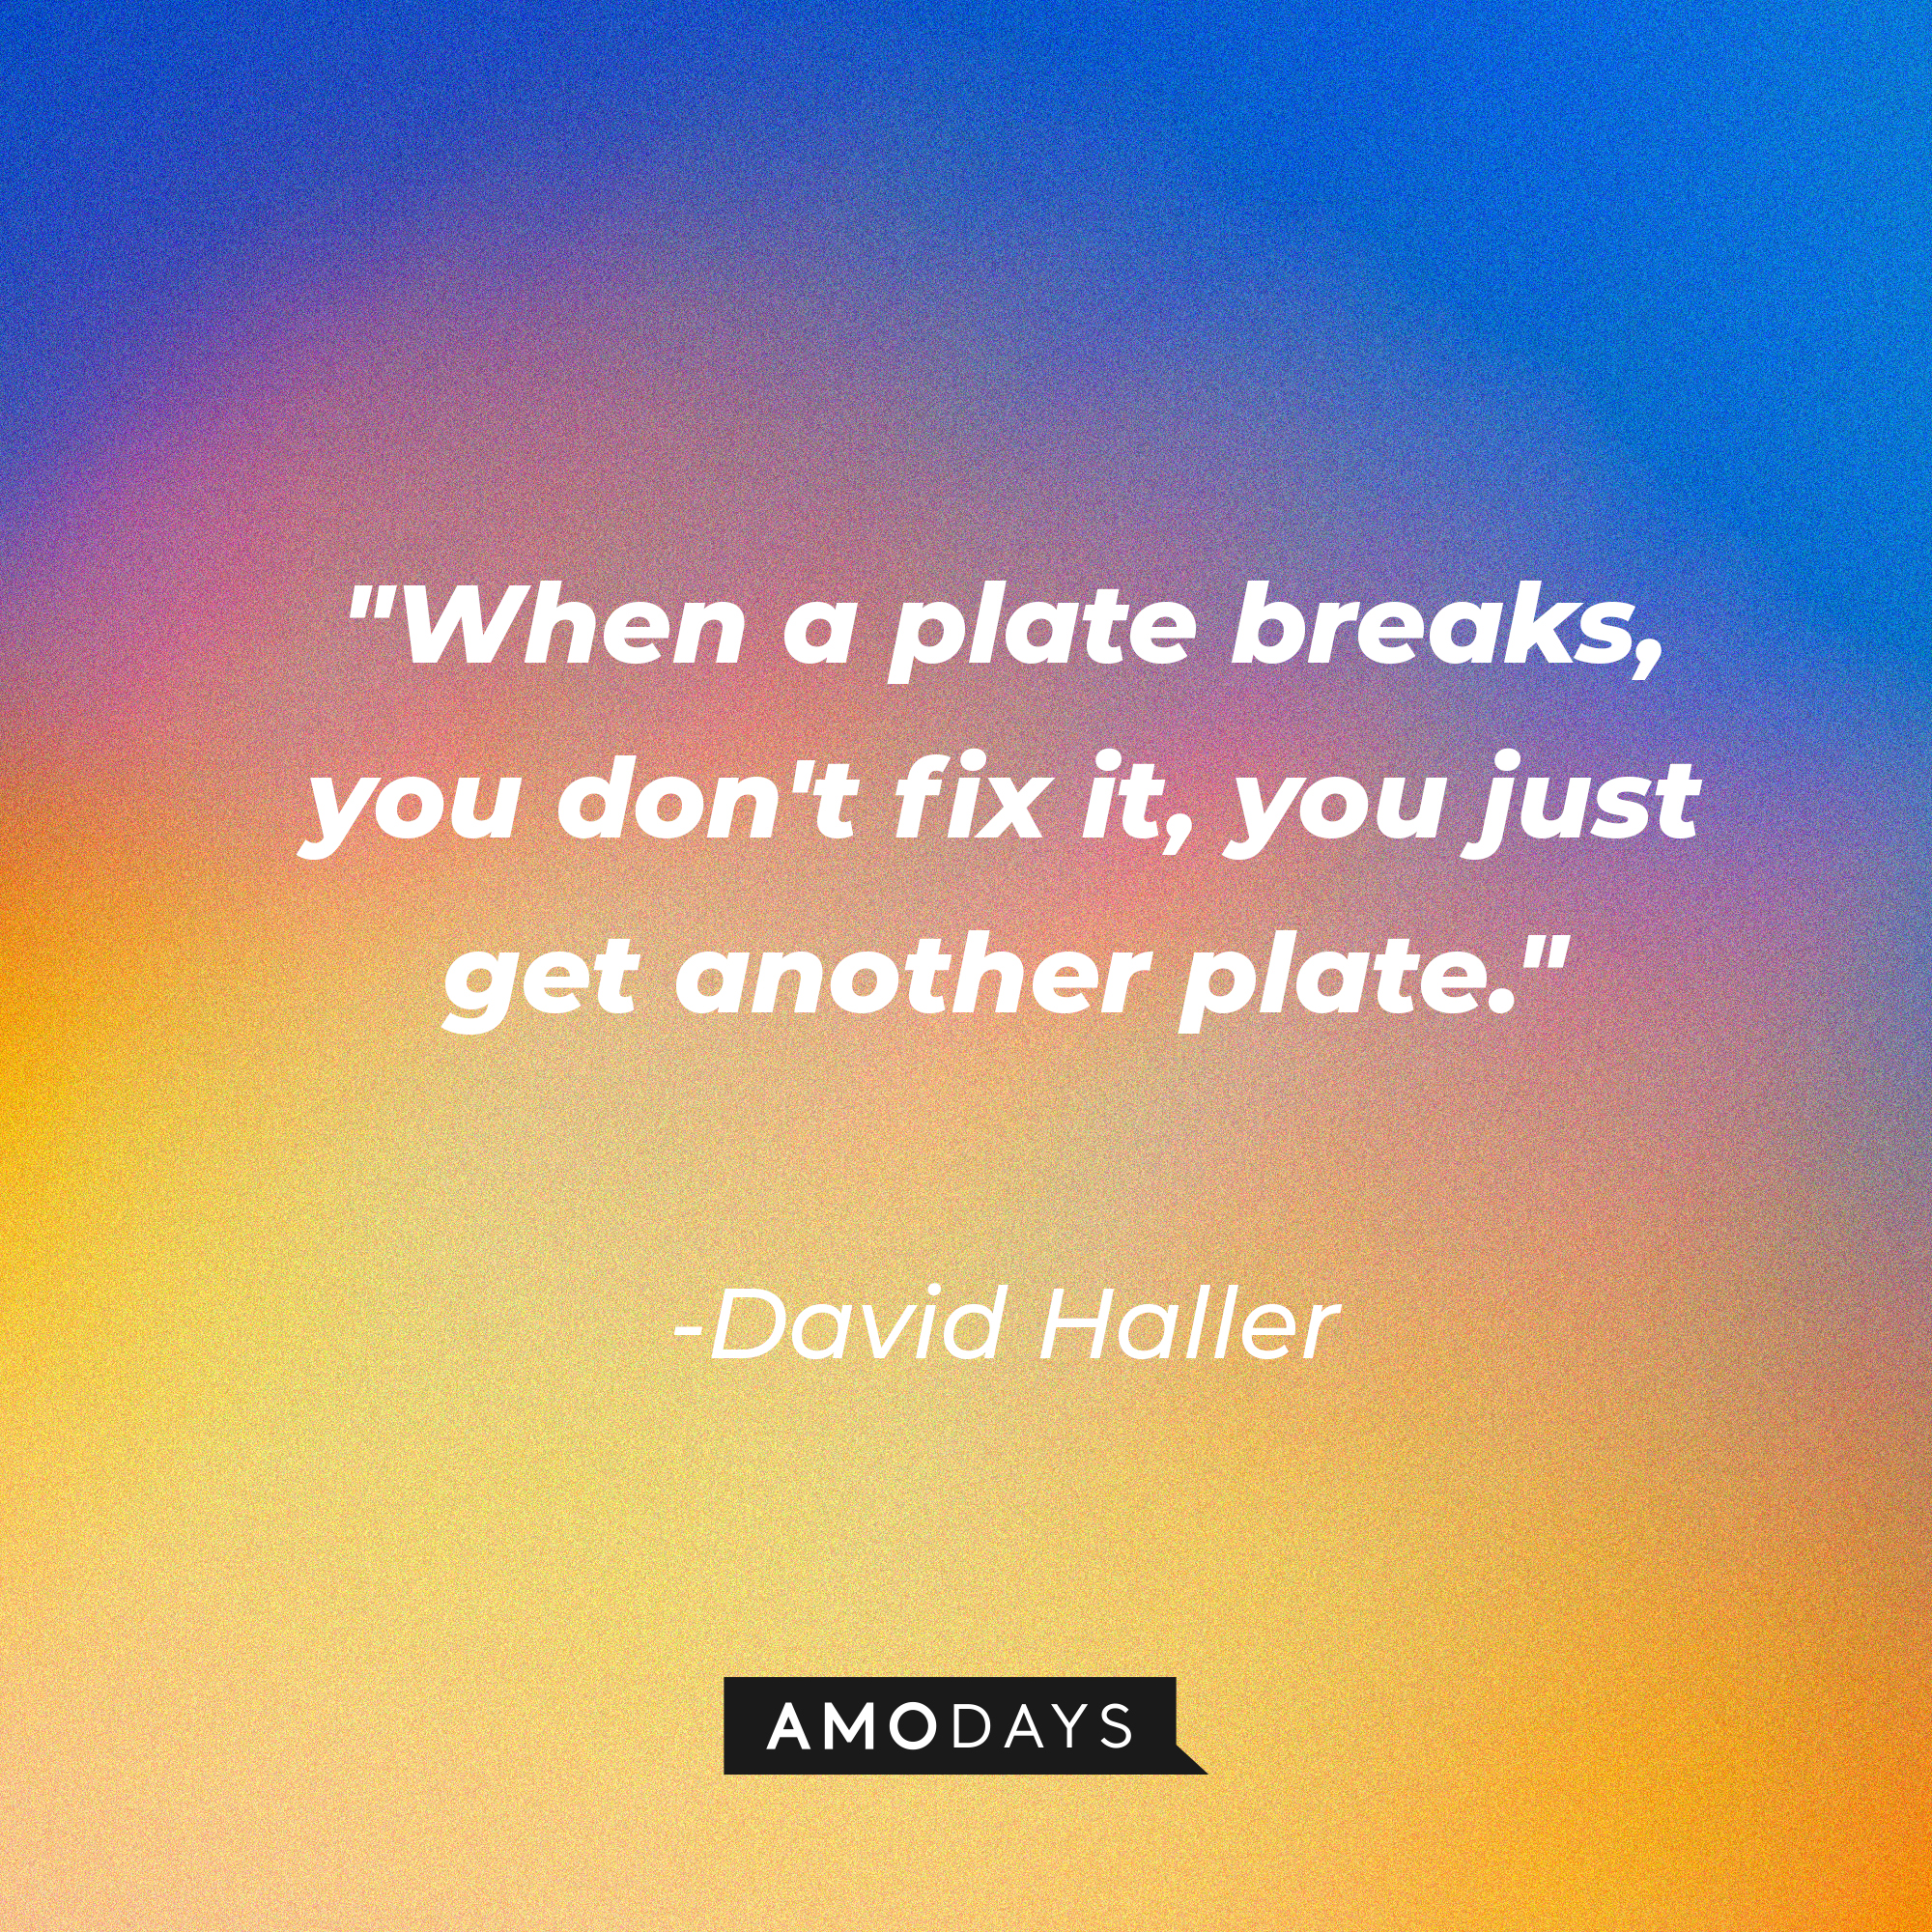 David Haller's quote "When a plate breaks, you don't fix it, you just get another plate." | Image: AmoDays